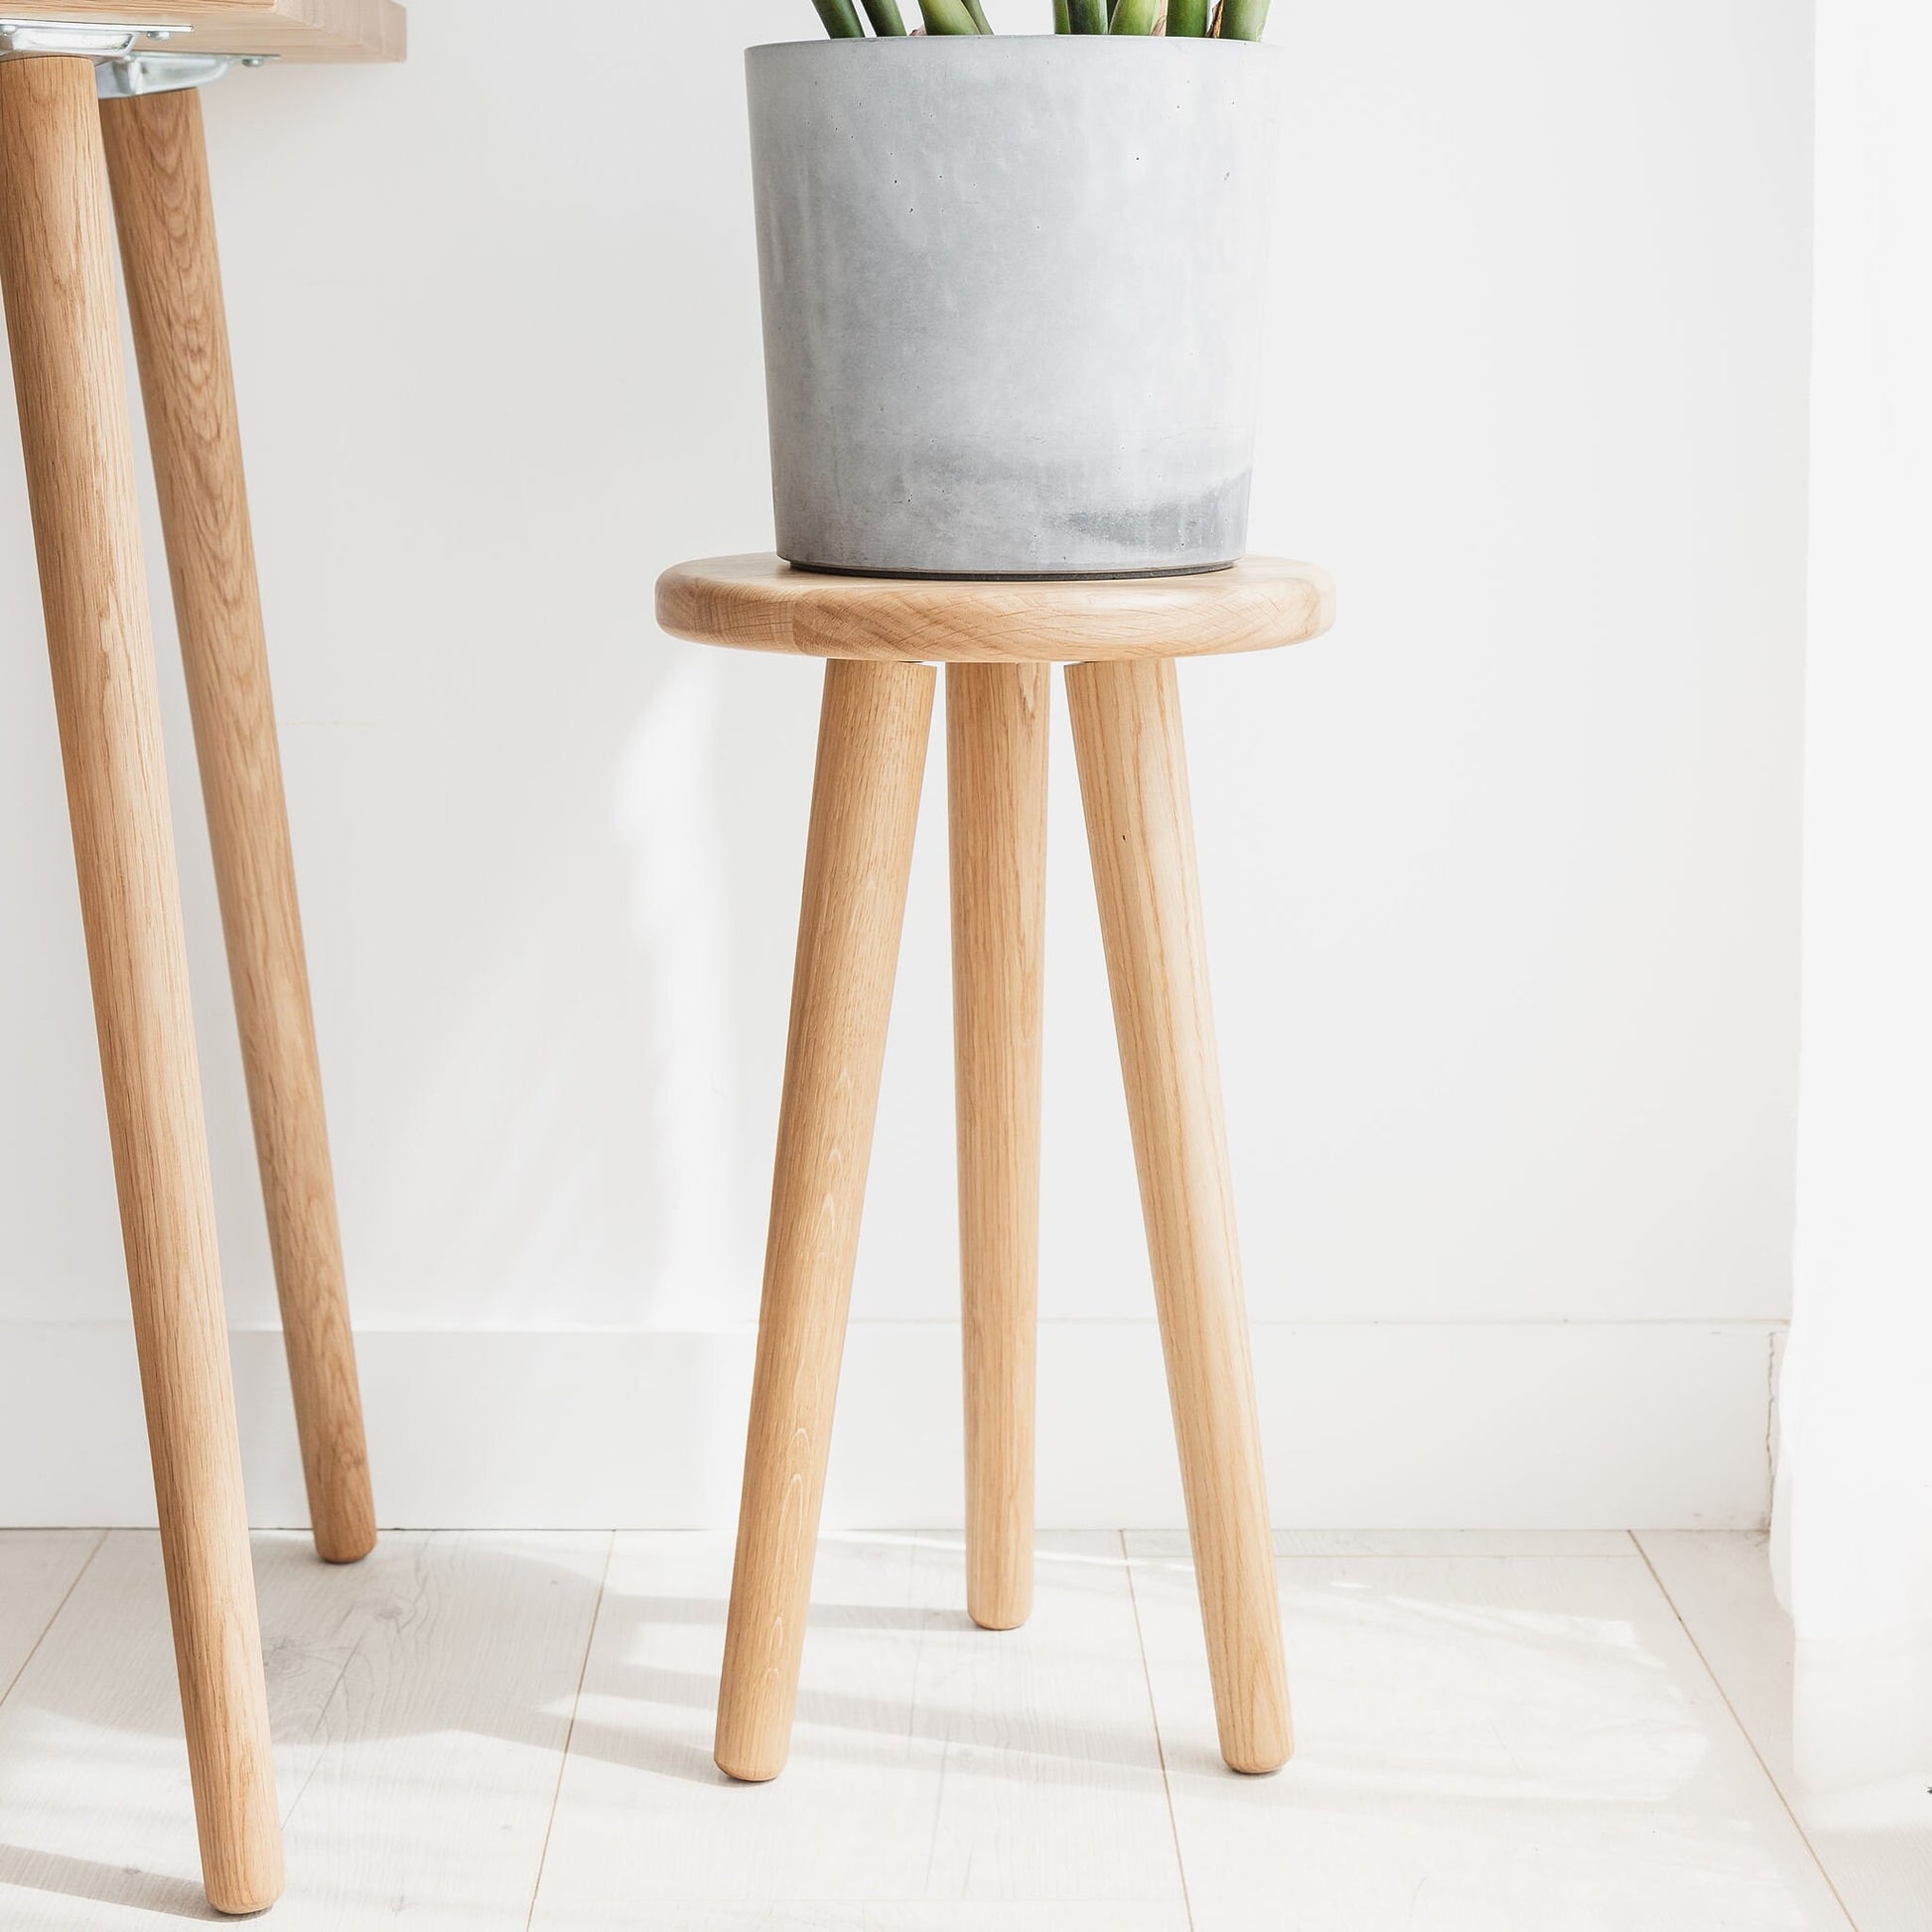 Round Side Table Or Stool Hand Made From Solid Oak Hardwood  Handcrafted in the UK. Mid Century Modern Nordic Scandinavian Furniture